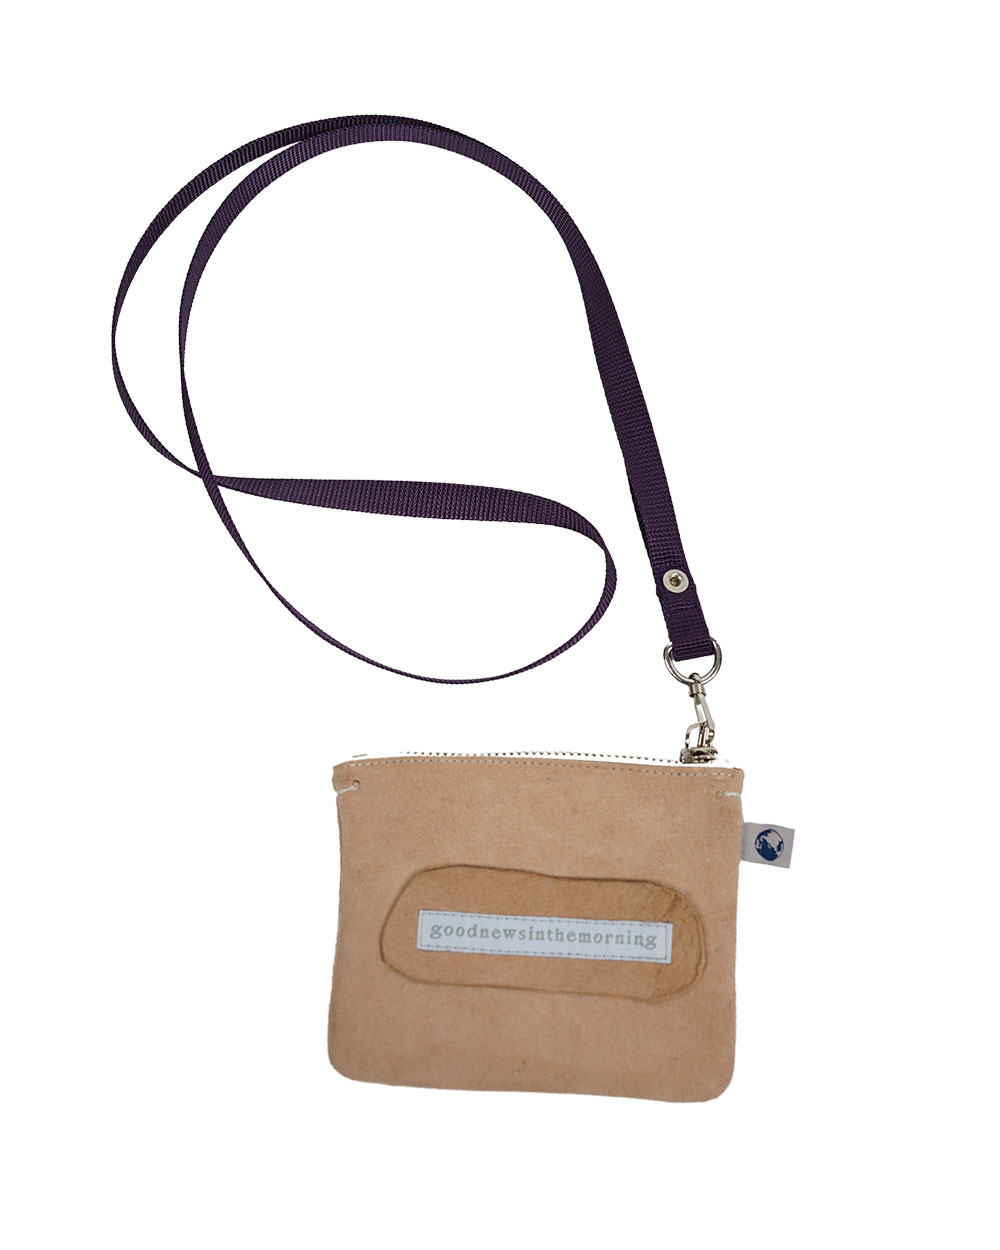 GOOD NEWS LEATHER POUCH (Skin)